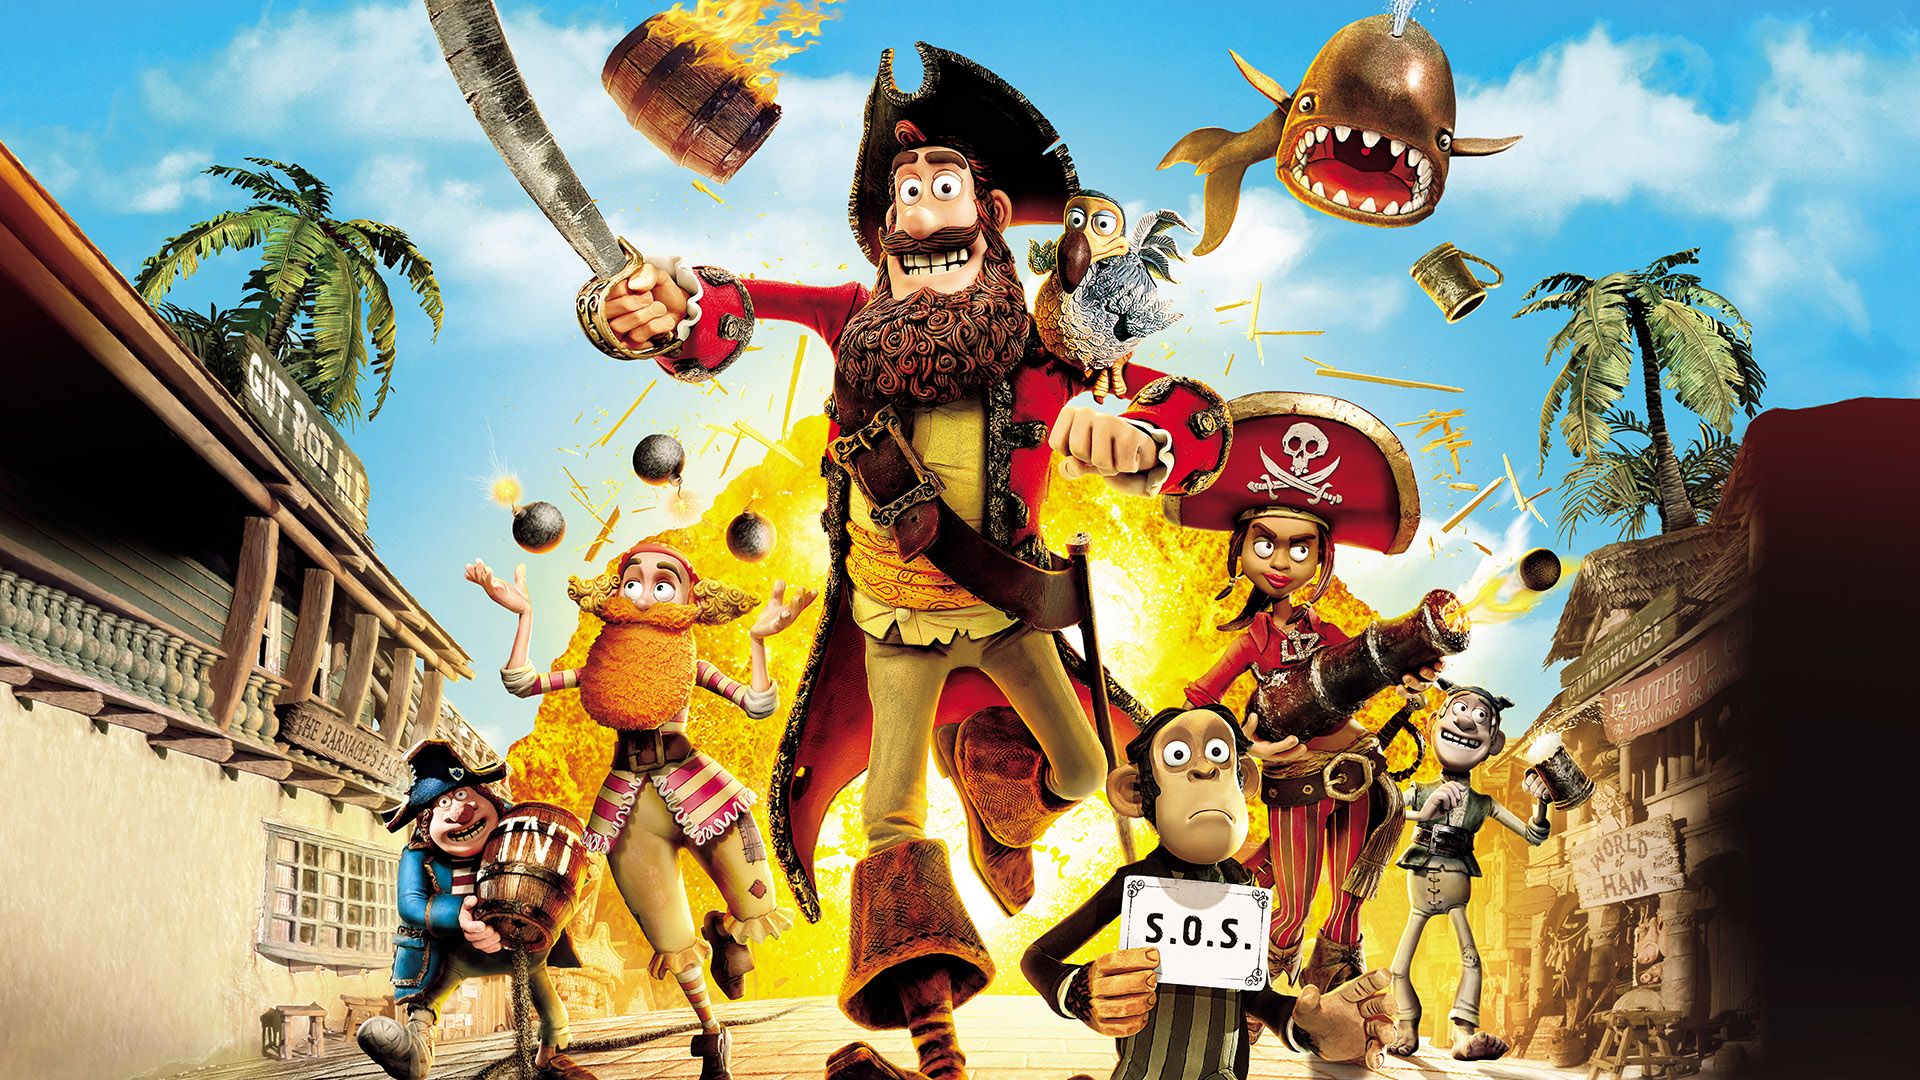 Wallpaper The Pirates! Band of Misfits, 2012 movie, animated movie